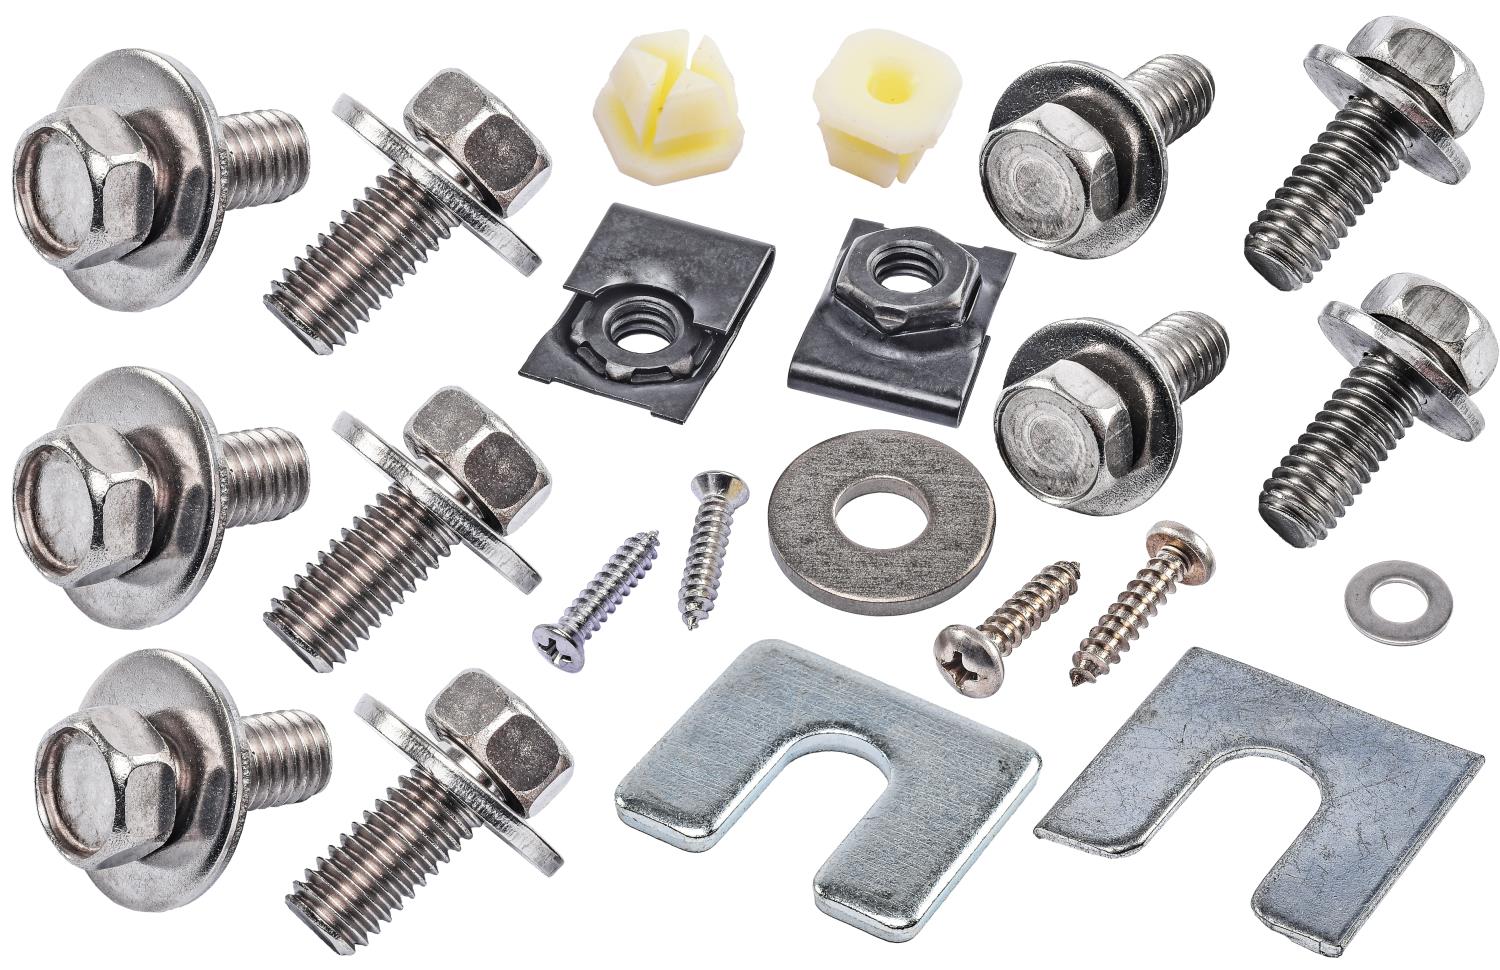 Front End Fastener Kit for 1967-1972 GM Truck, Blazer, Jimmy, Suburban [Polished Stainless Steel]